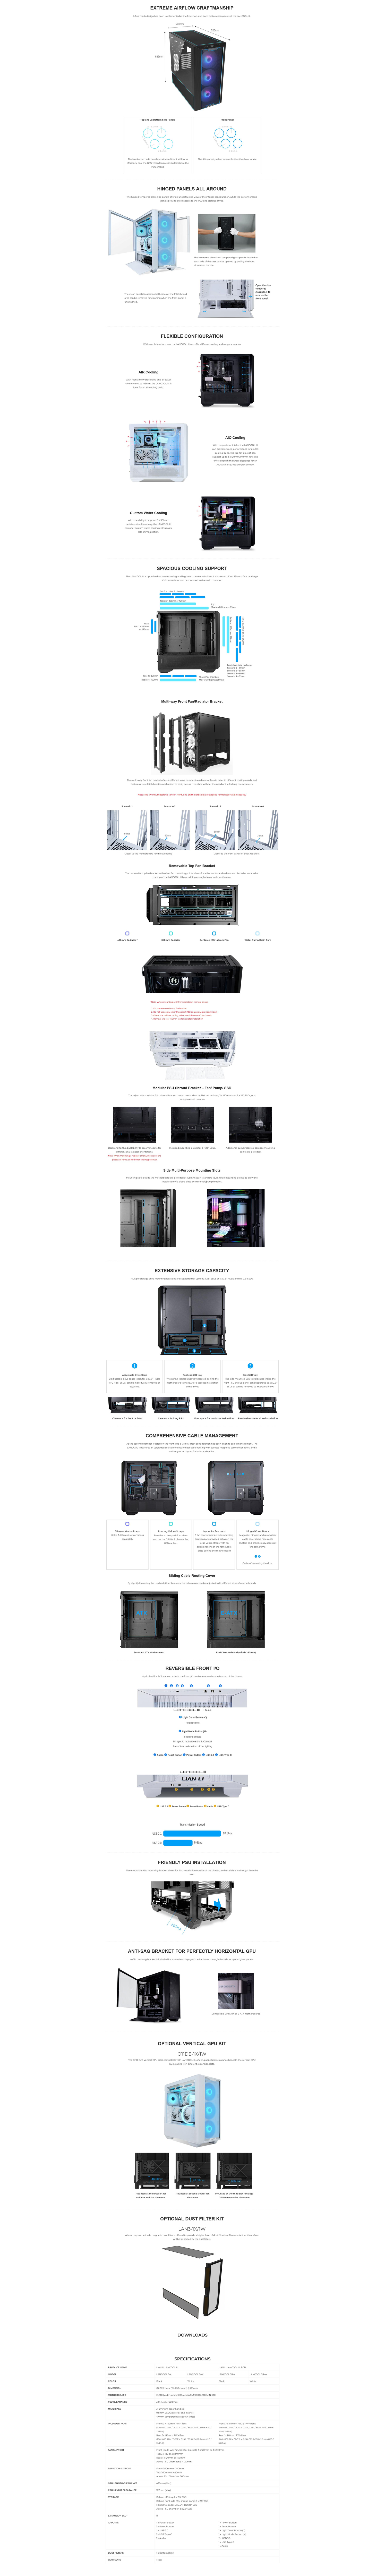 A large marketing image providing additional information about the product Lian Li Lancool III Mid Tower Case - Black - Additional alt info not provided